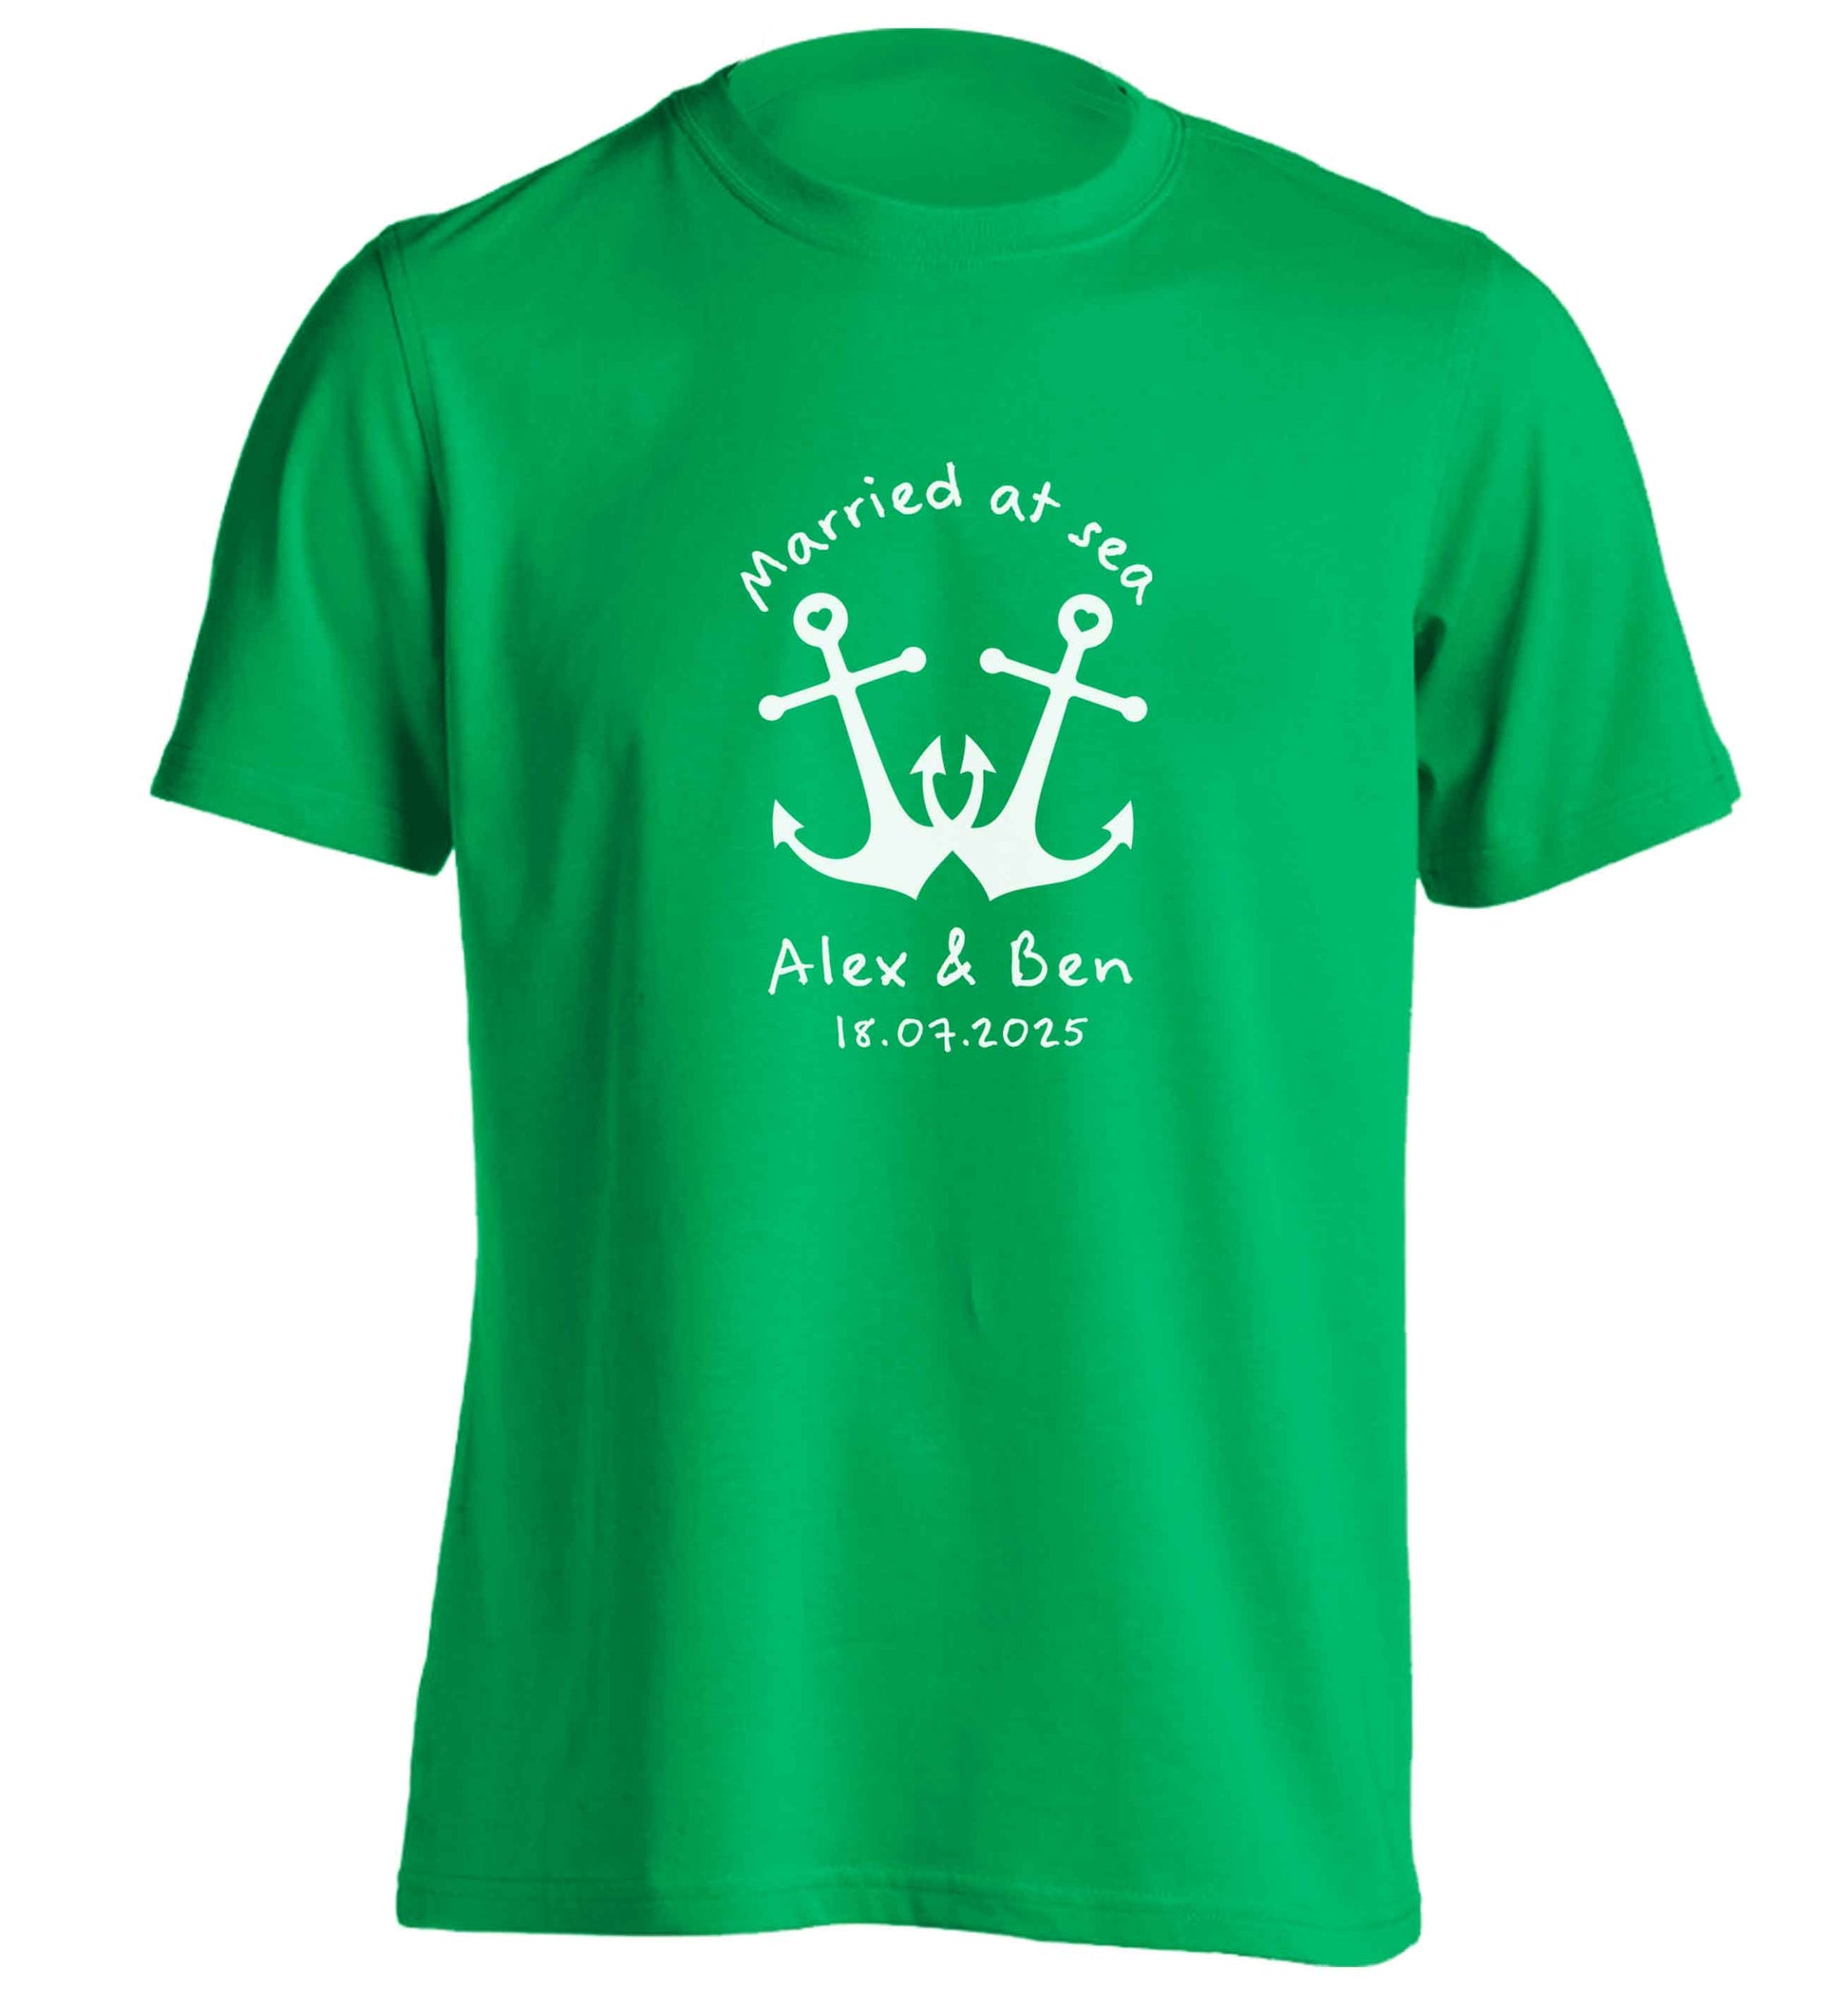 Married at sea blue anchors adults unisex green Tshirt 2XL